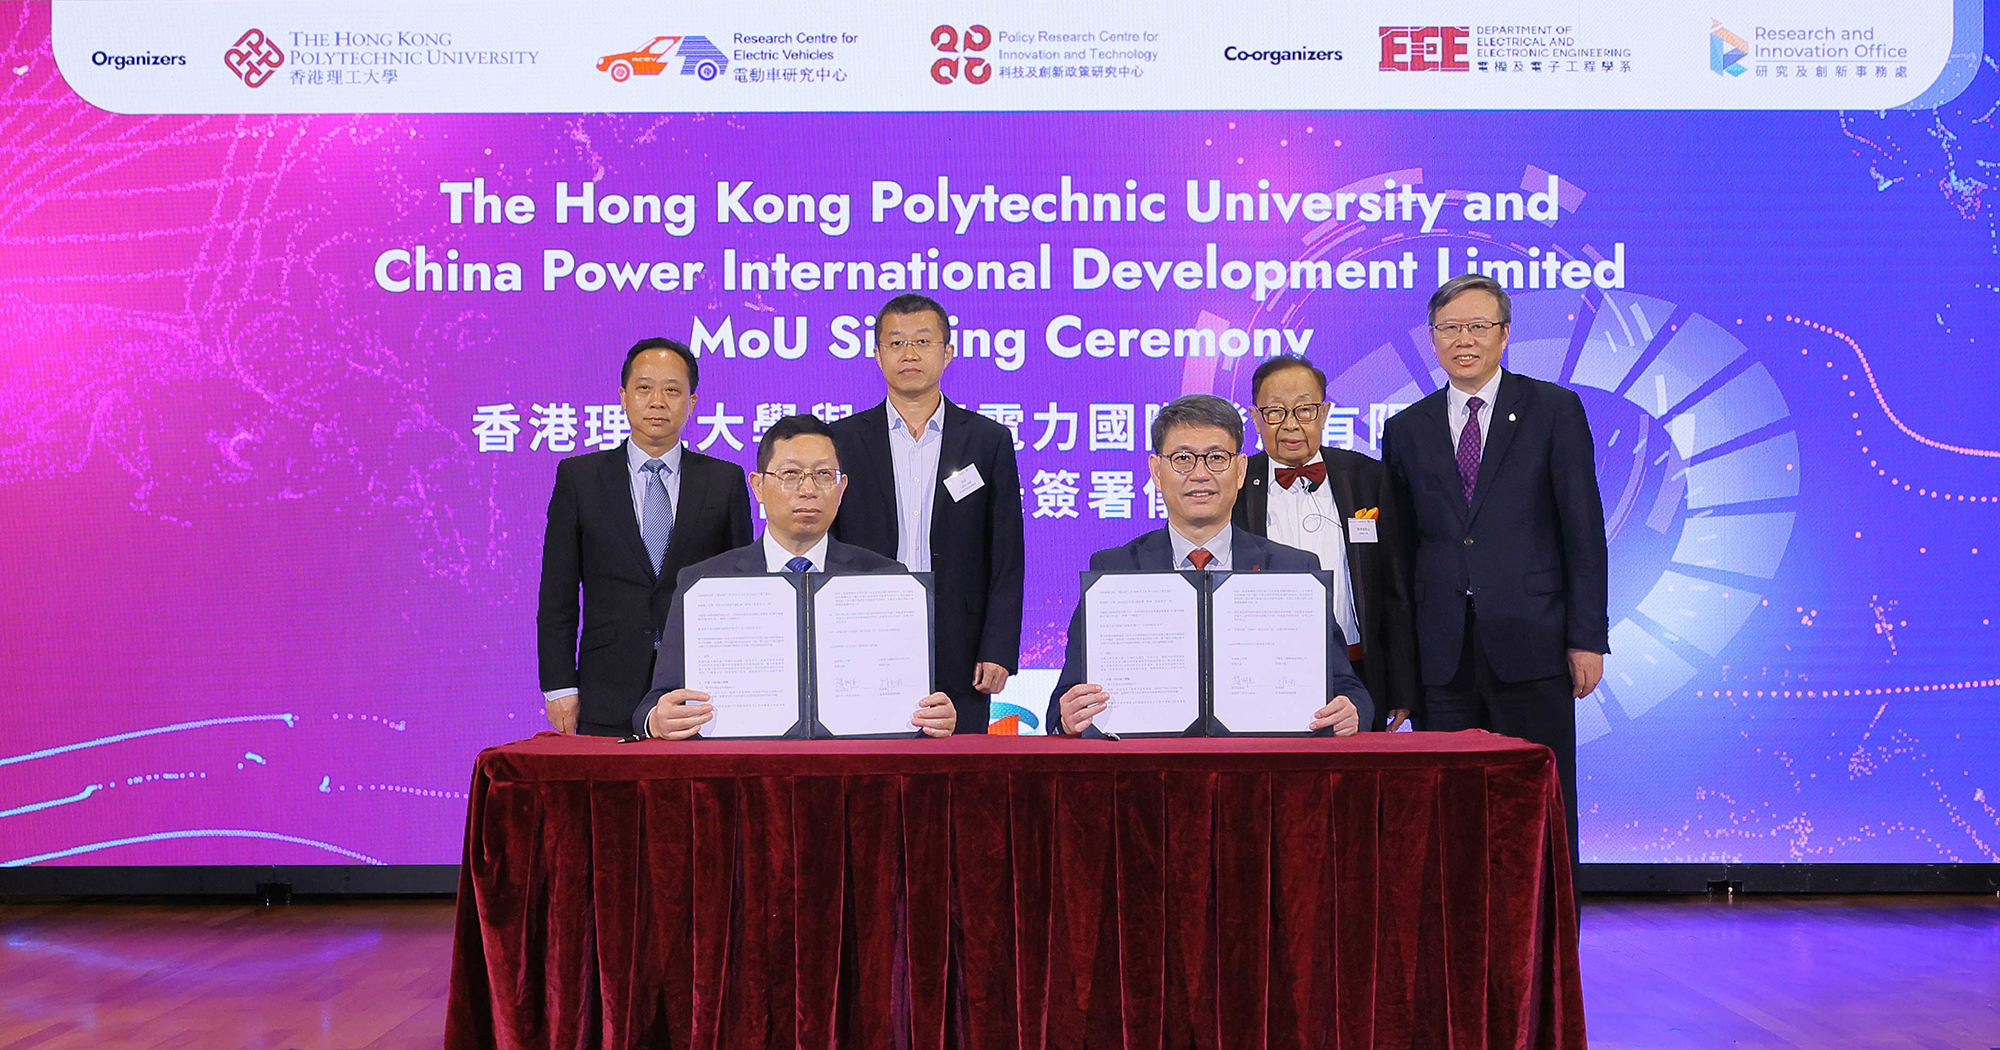 Witnessed by Prof. Jin-Guang Teng, PolyU President (1st from right, back row); Prof. C.C. Chan, RCEV Director (2nd from right, back row), Mr Ye Shuiqiu, Deputy Director-General, Department of Educational, Scientific and Technological Affairs, Liaison Office of the Central People's Government in the HKSAR (1st from left, back row); and Mr Chang FANG, Senior Manager, China Power International Development Limited (2nd from left, back row), an MoU was signed by Prof. Christopher Chao, PolyU Vice President (Research and Innovation) and Director of the Policy Research Centre for Innovation and Technology (right, front row) ; and Mr Weikang LIN, General Manager, China Power International Development Limited (left, front row).